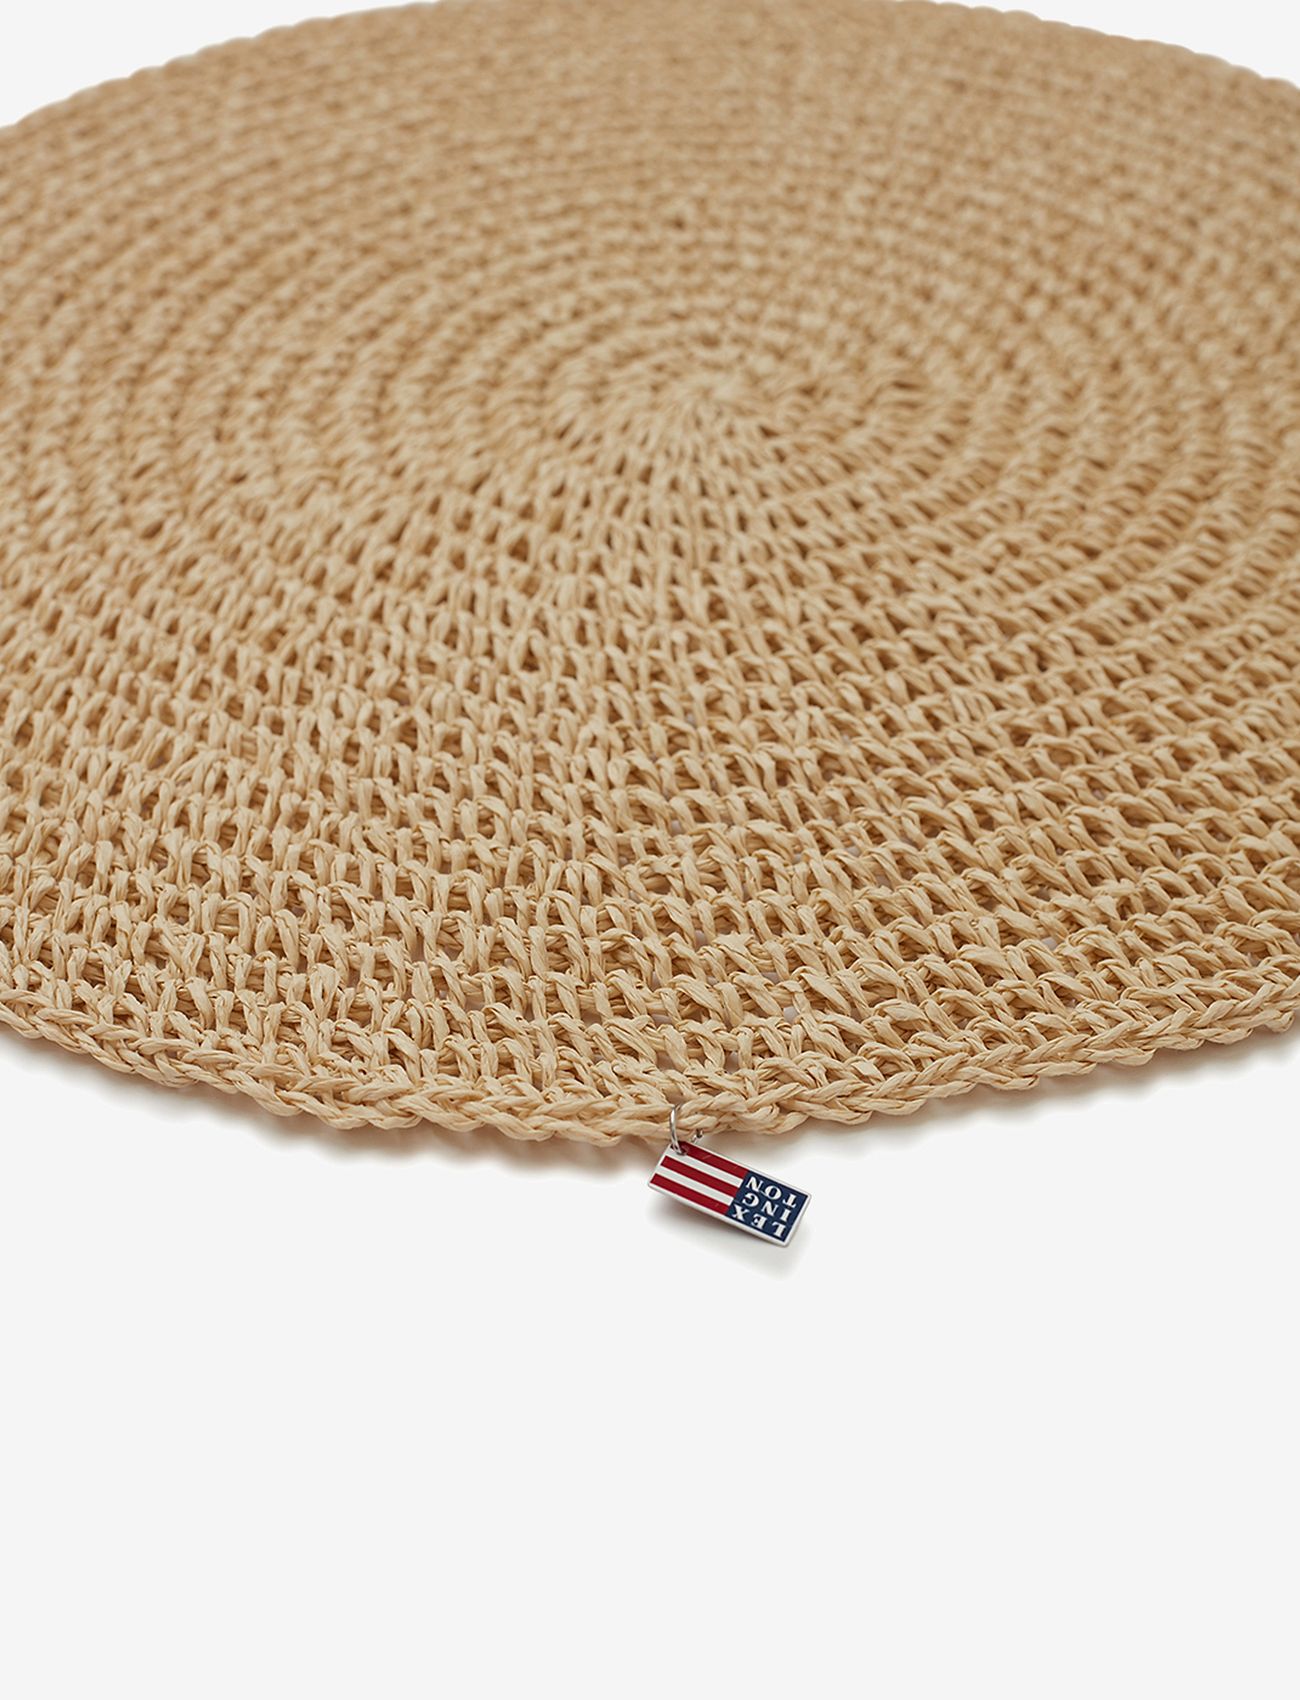 Lexington Home - Round Recycled Paper Straw Placemat - alhaisimmat hinnat - natural - 1